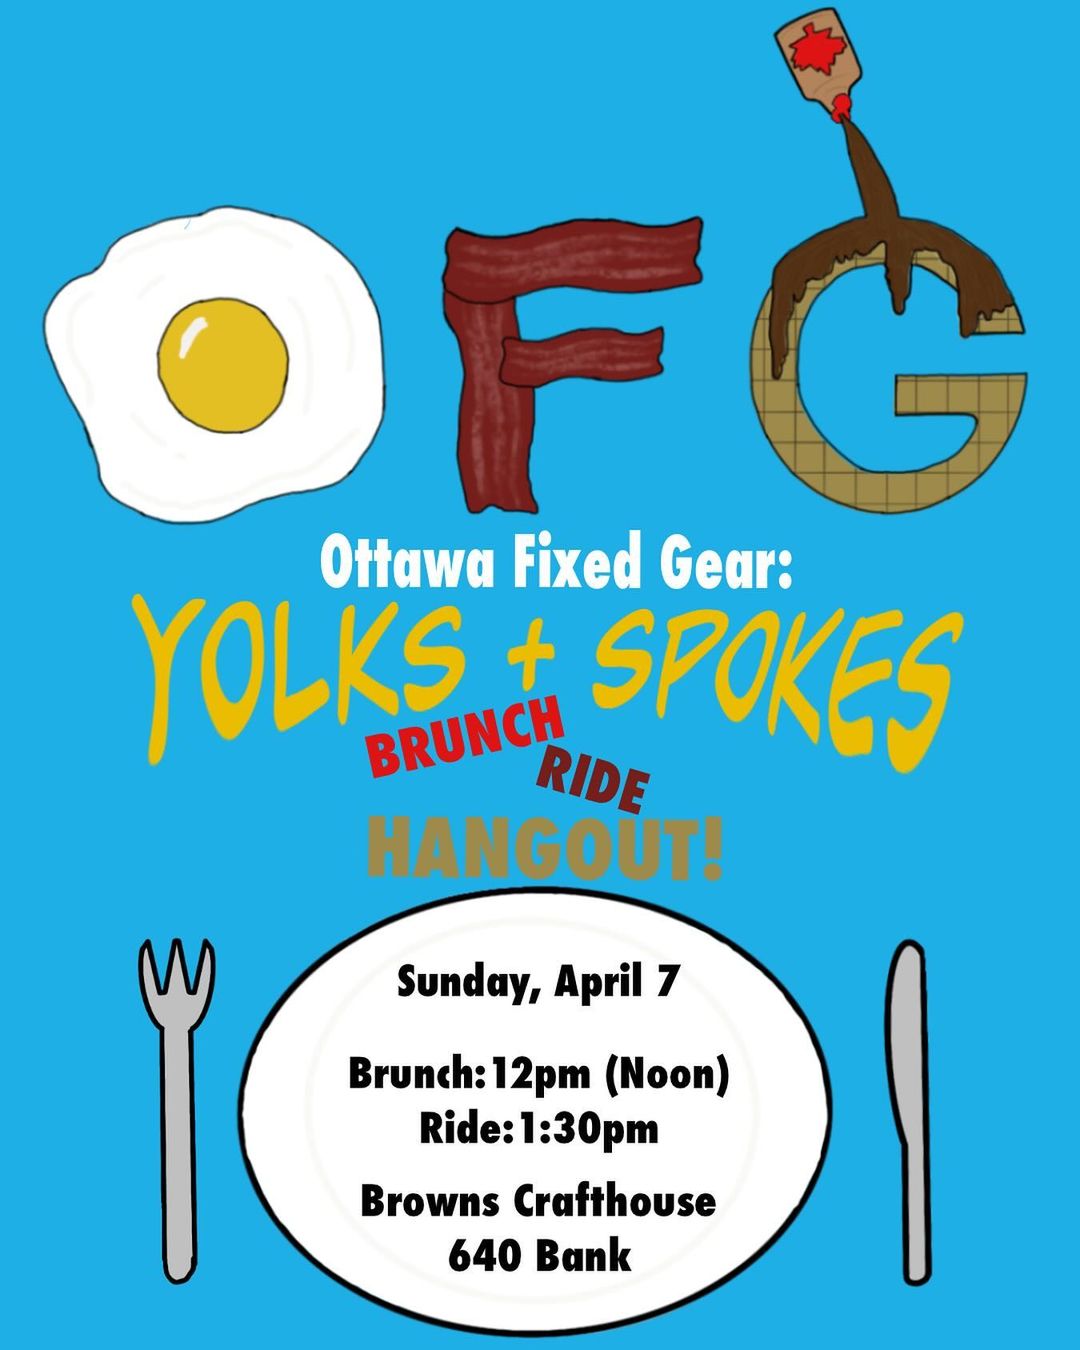 Yolks + Spokes: Brunch and Ride